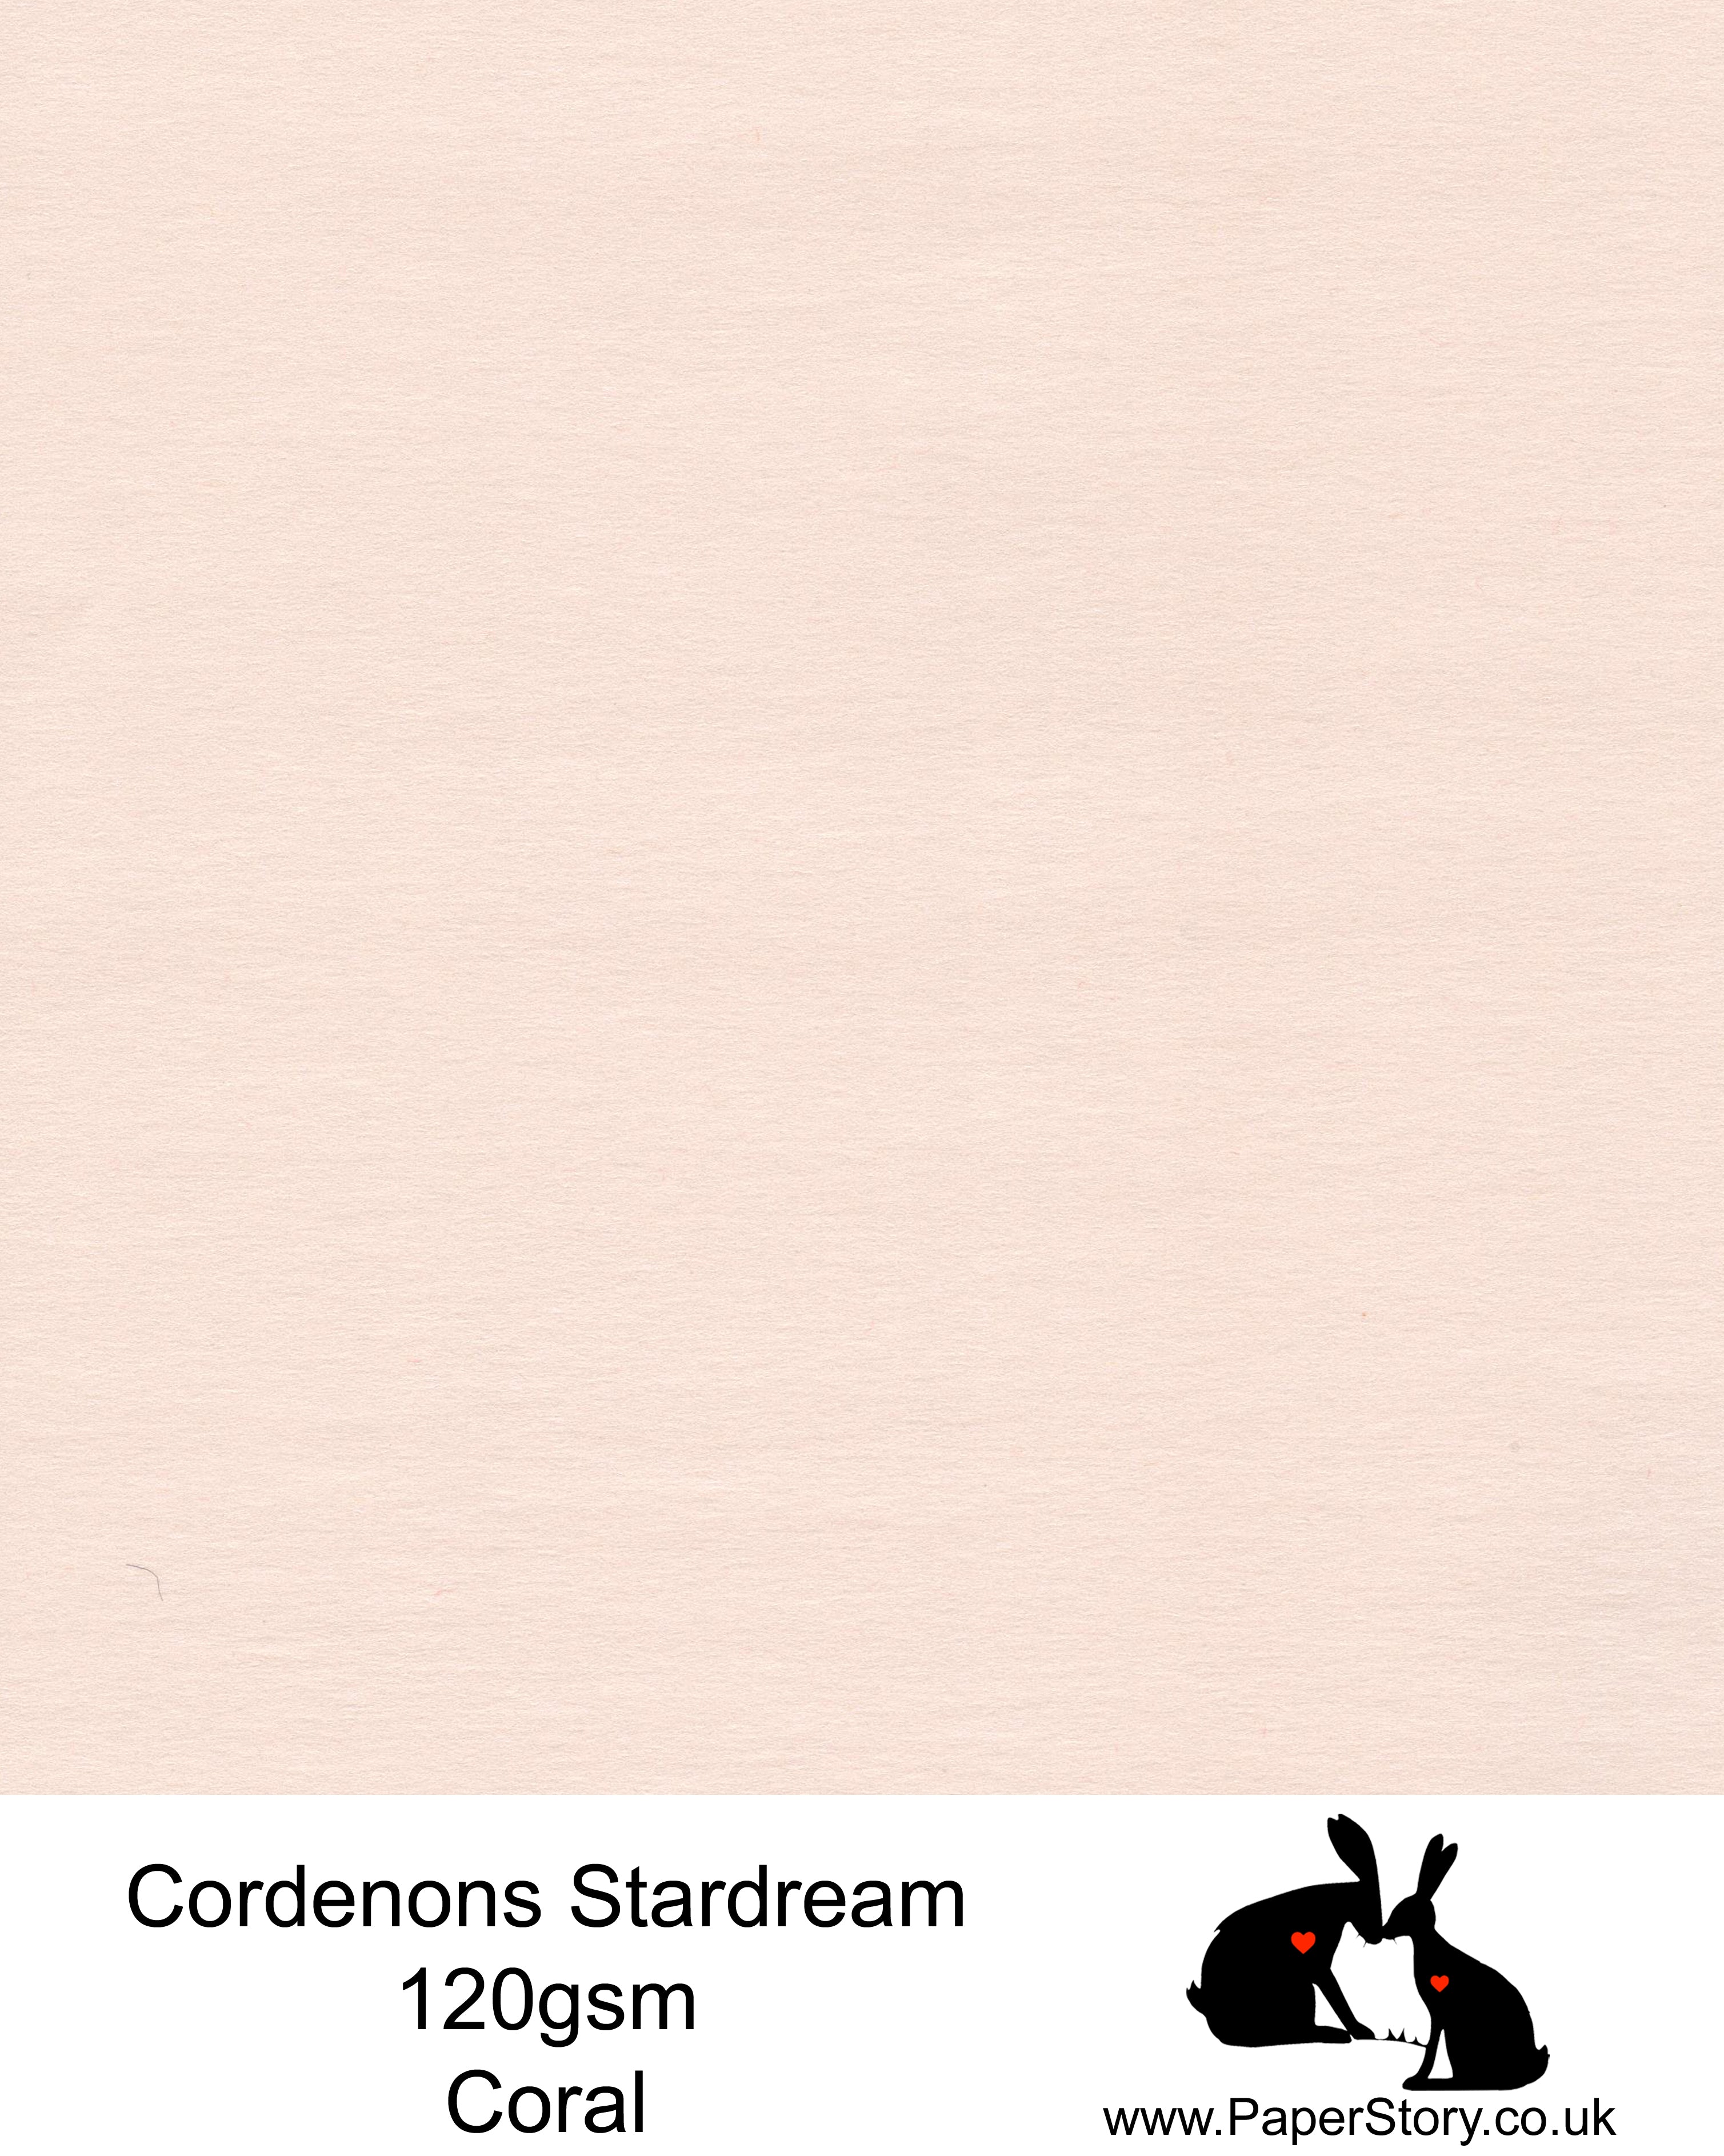 A4 Stardream 120gsm paper for Papercutting, craft, flower making  and wedding stationery. Soft pink coral colour, beautiful for flower making and wedding stationery.